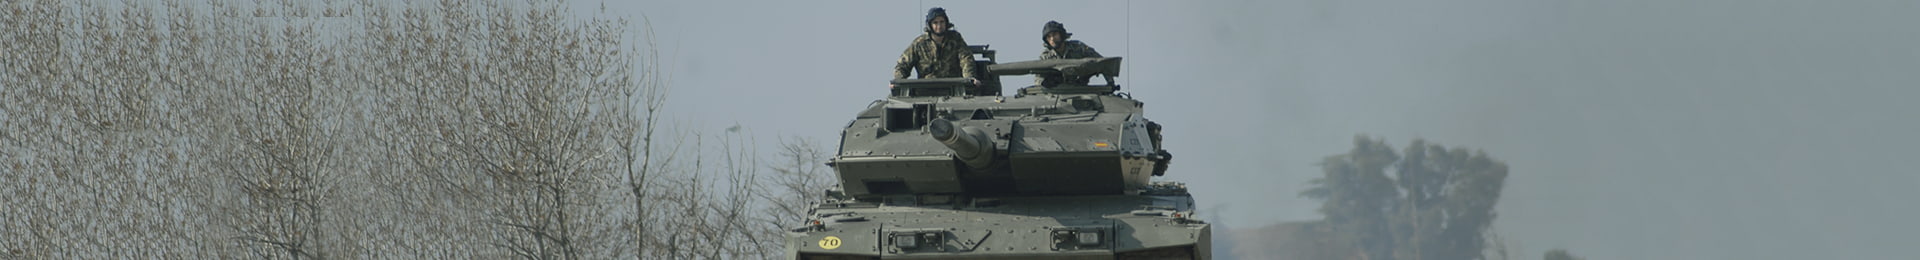 Systems for Military Vehicles Indra Defence and Security